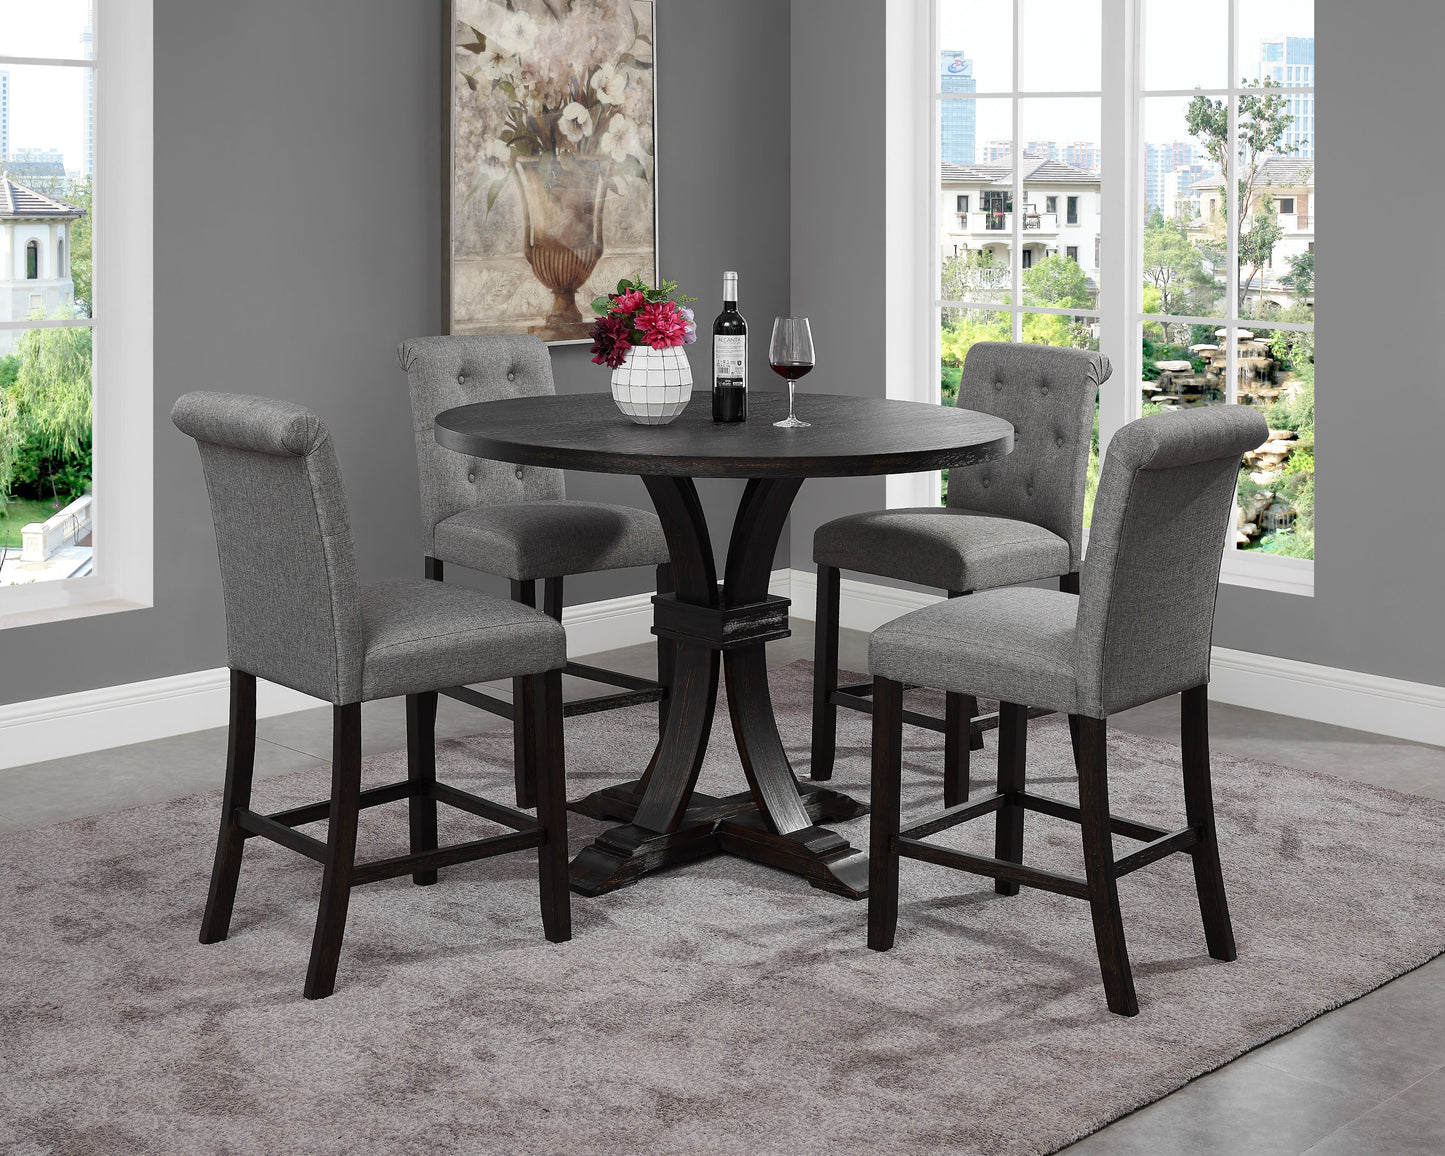 Siena Distressed Black Finish 5-Piece Counter Height Dining set, Pedestal Round Table with Gray Chairs